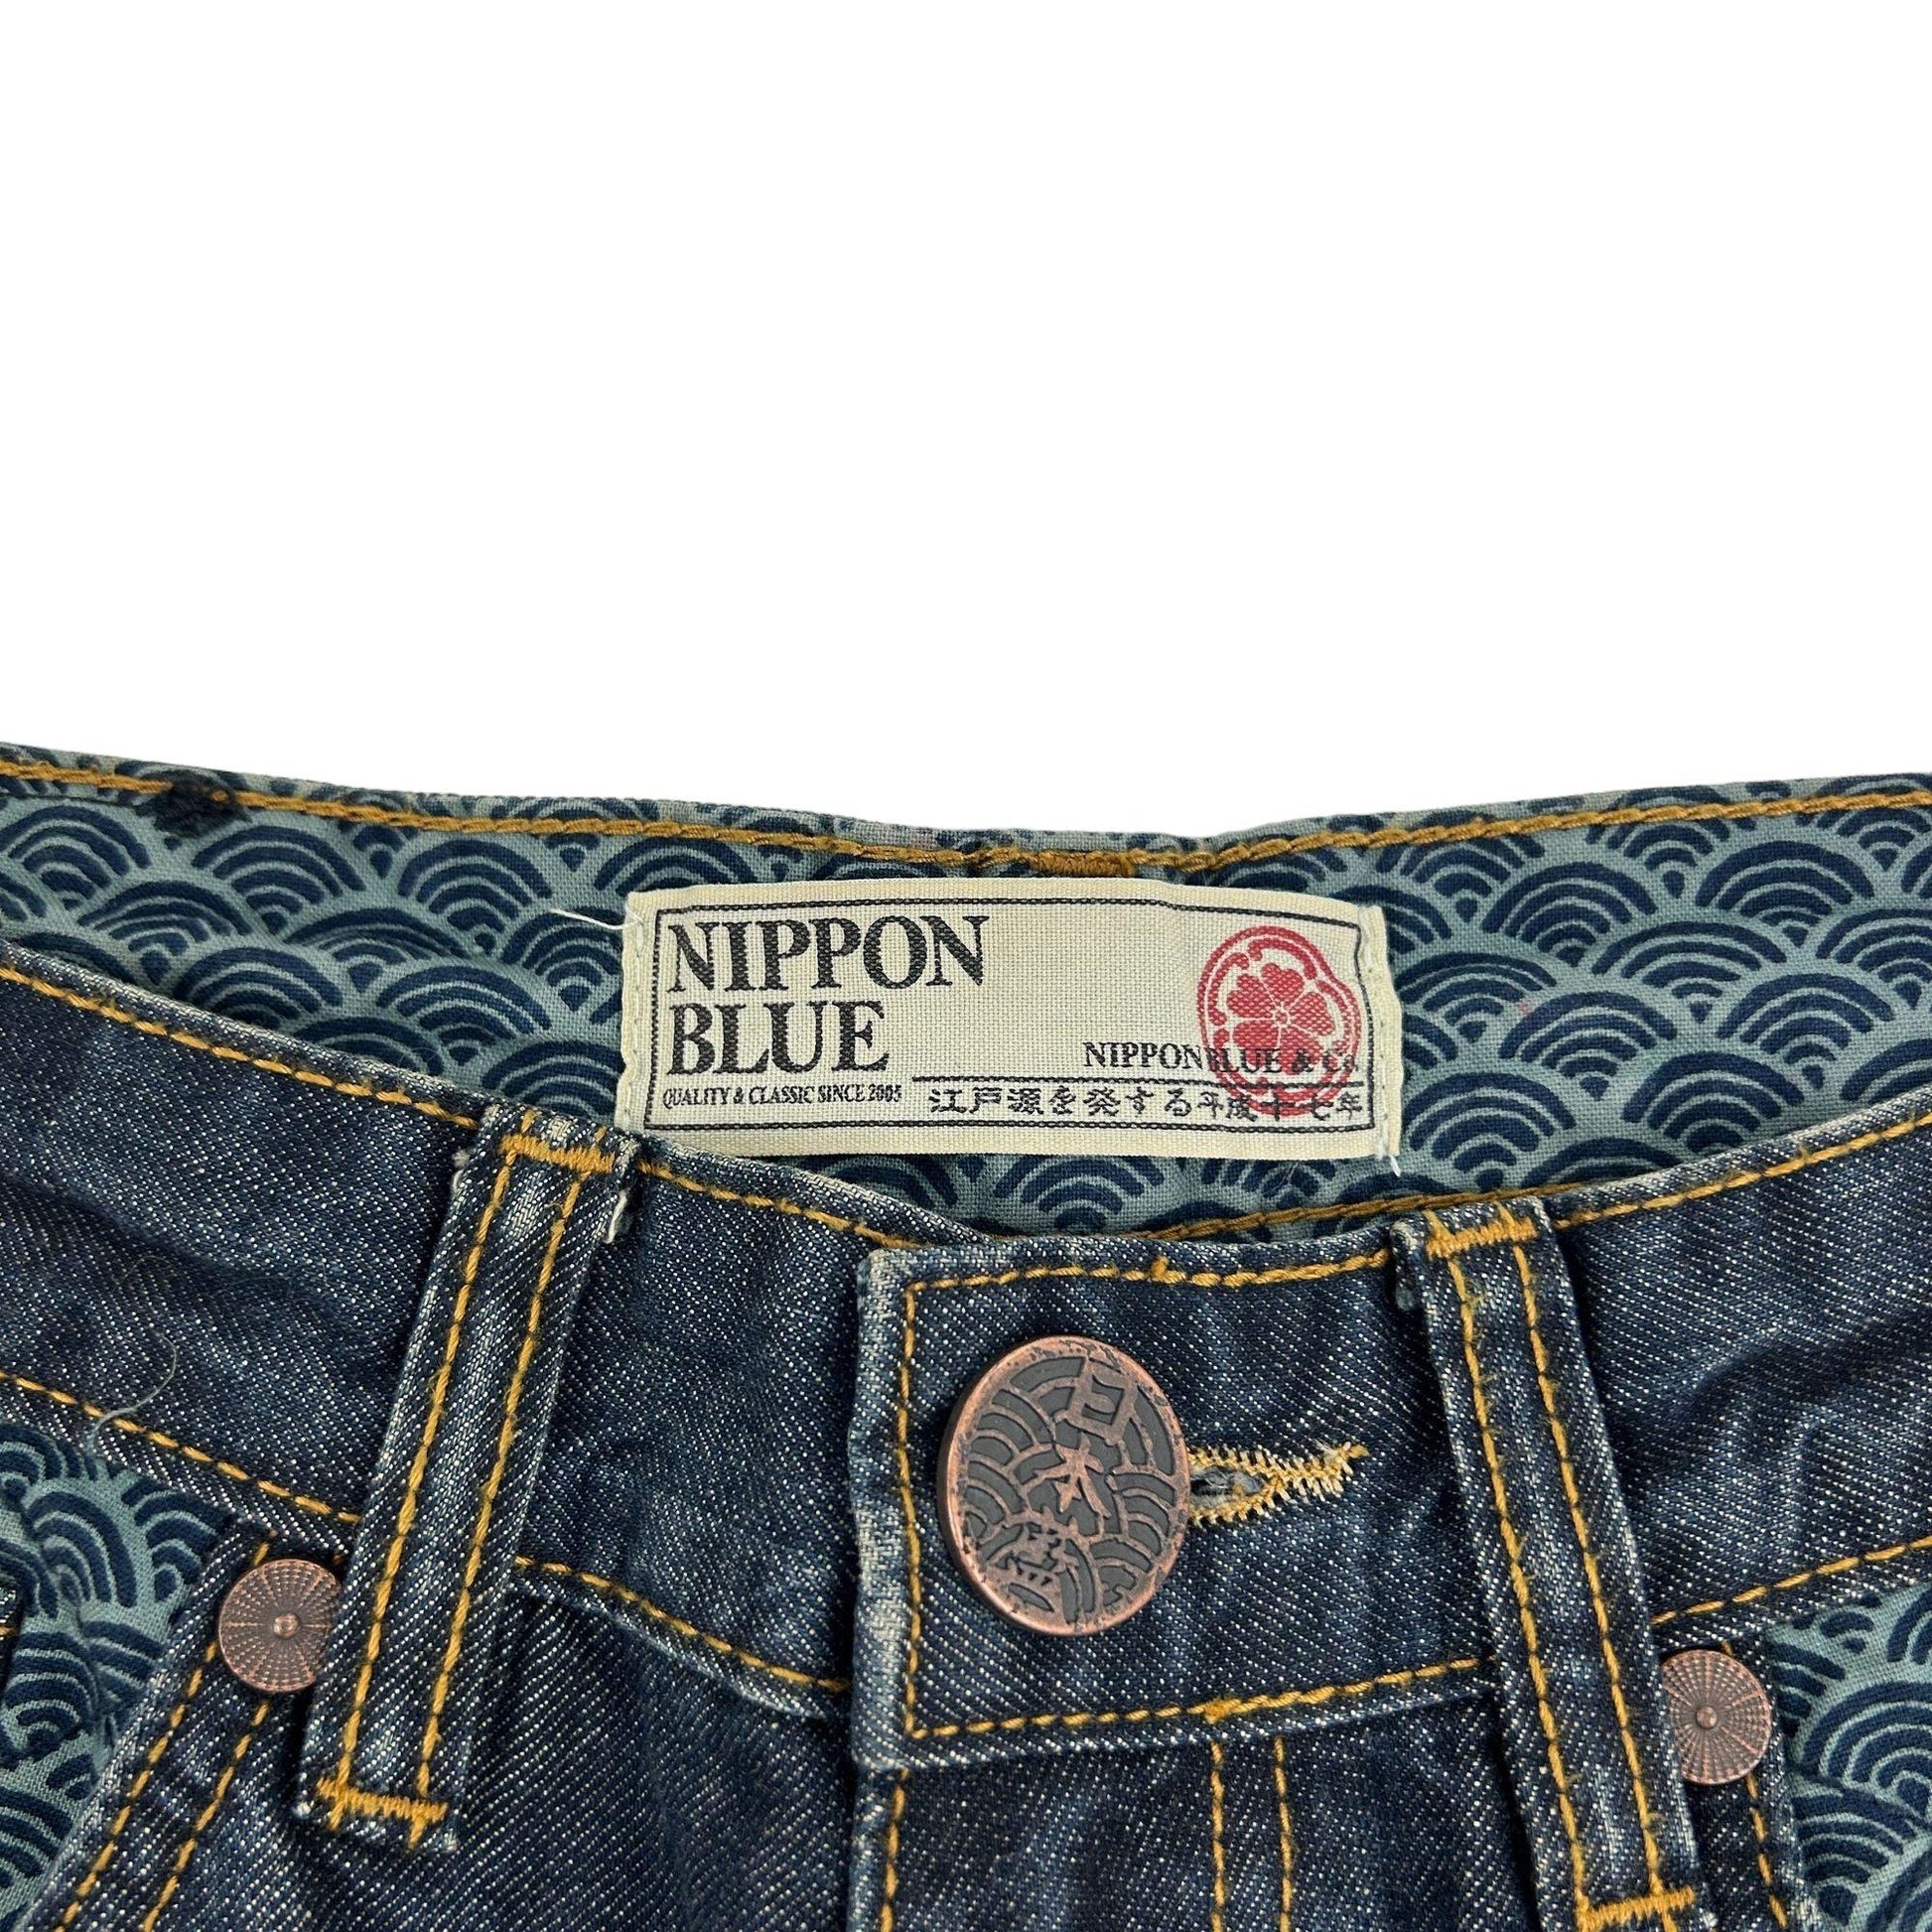 Vintage Koi Fish Nippon Blue Embroidered Japanese Denim Jeans Size W28 - Known Source